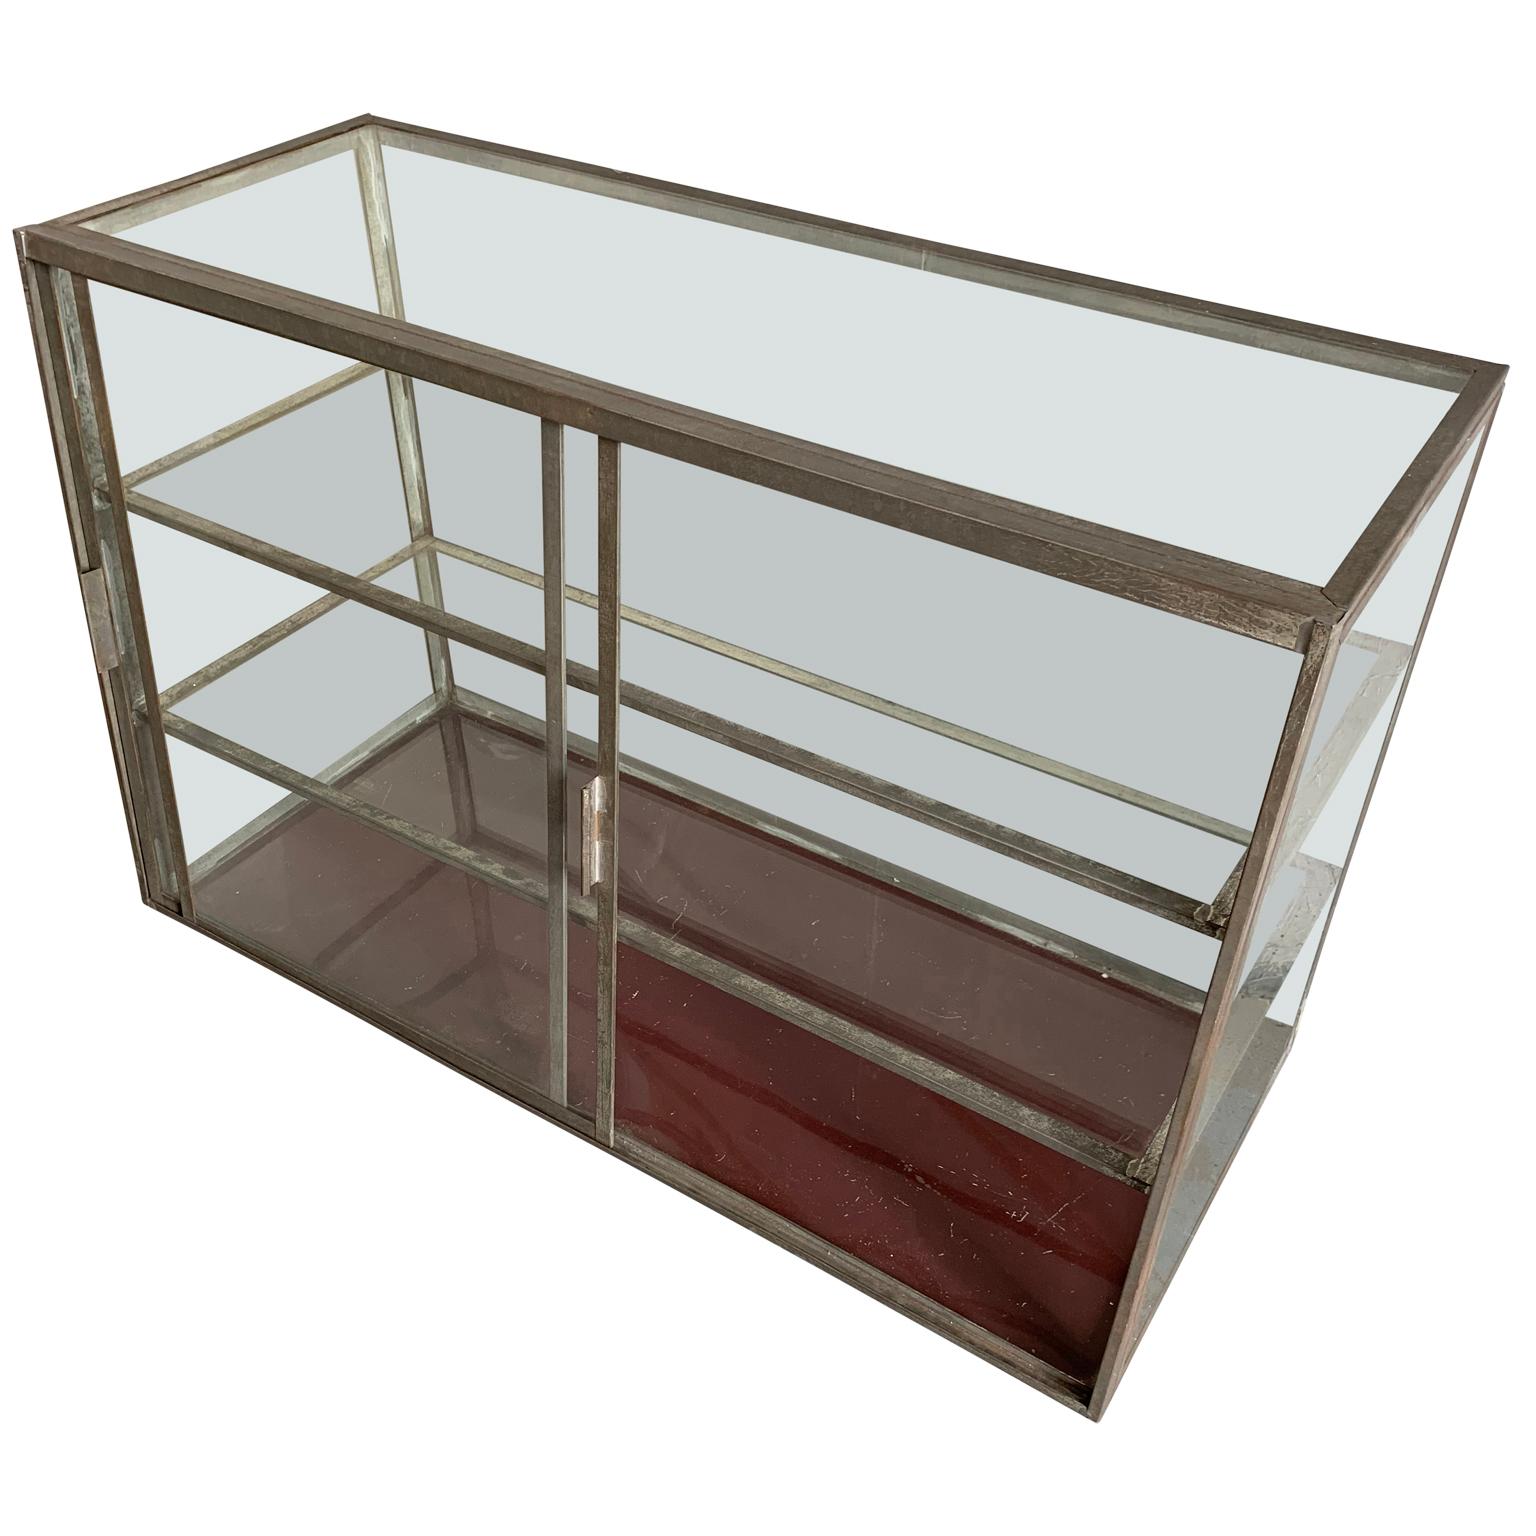 Glass Early American Vintage Two-Tier Sheet Metal Table Top Shop Display Case